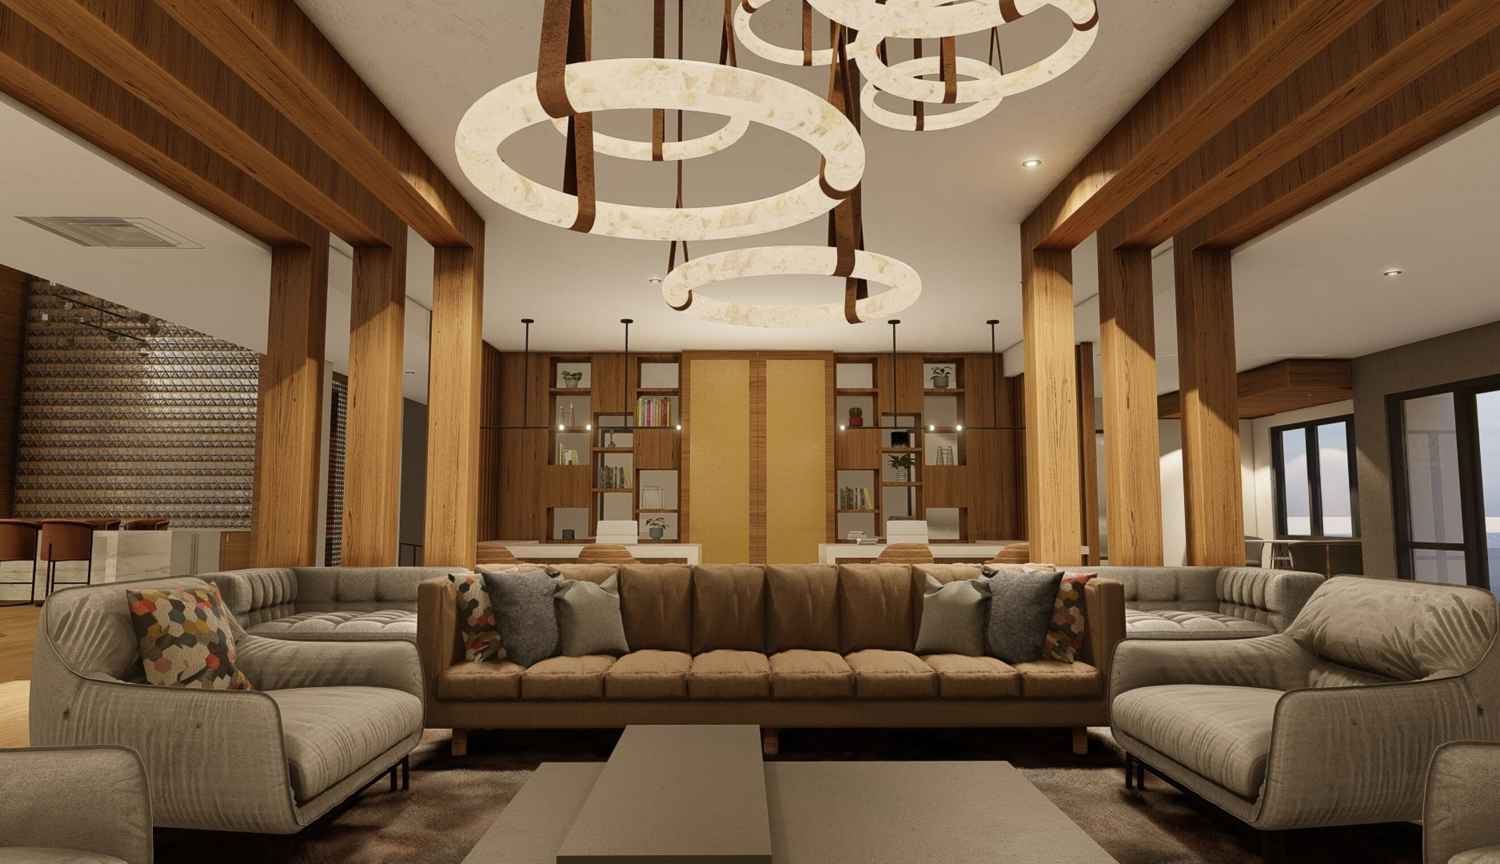 Natomas Fountains interior, rendering by Hines